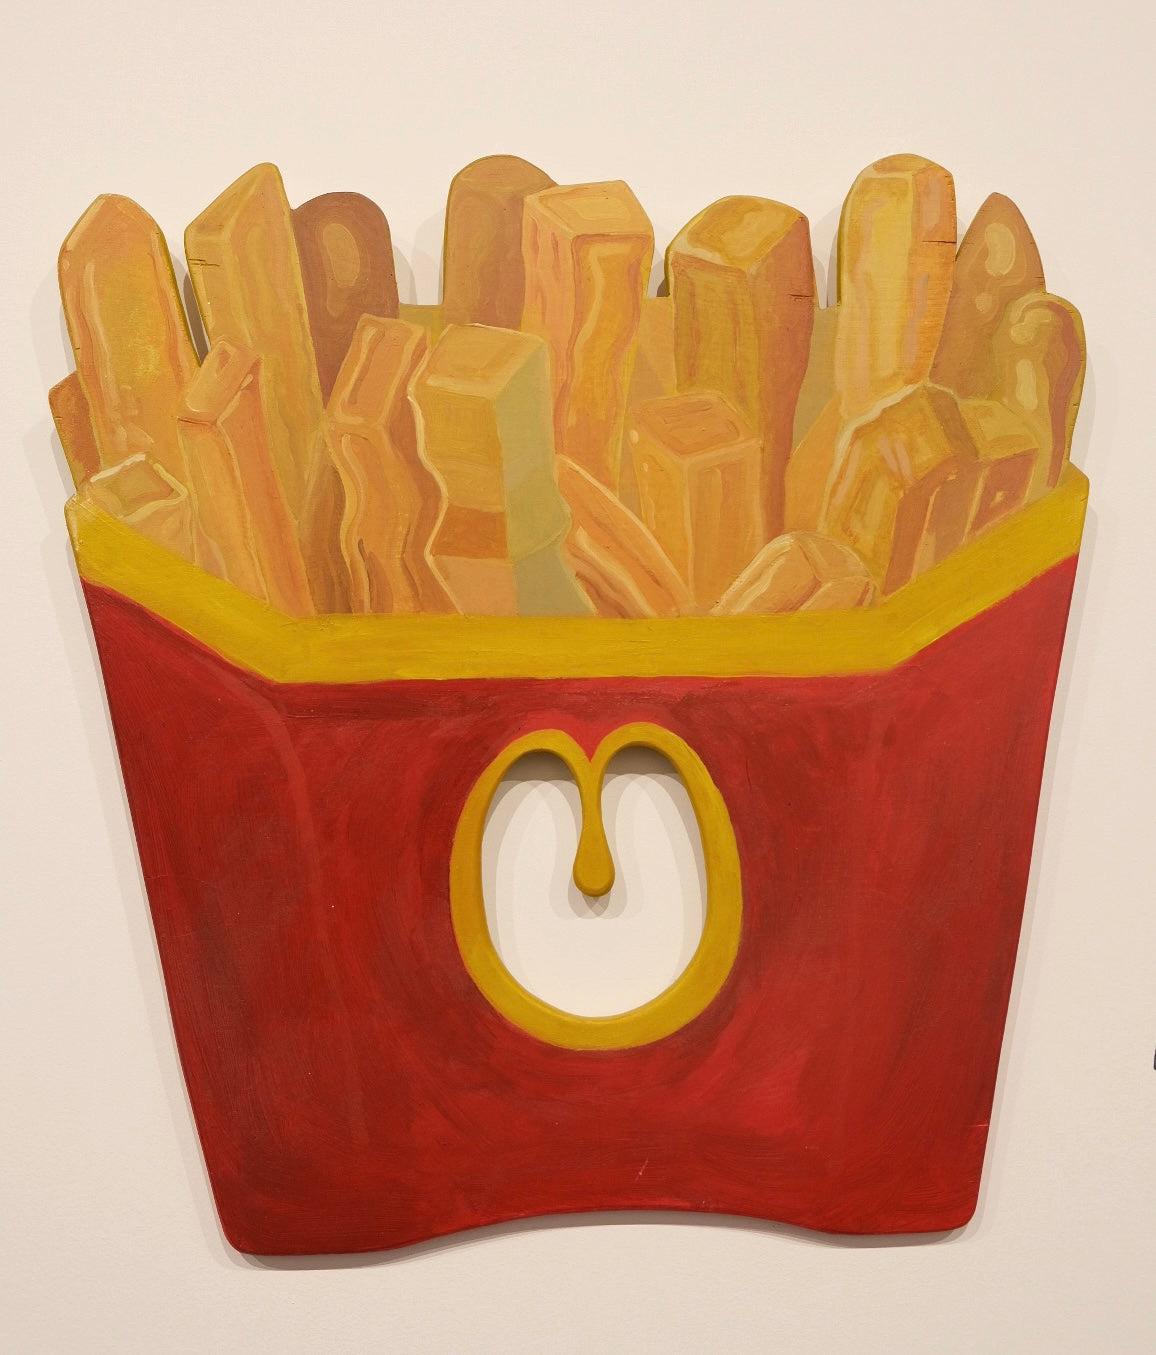 Beefgrindr, Fries, 2023

Acrylic on wood

58 x 60 cm 22.8 x 23.6 in

Tomas Demisevicius or /Beefgrindr] is a L, gay, visual artist and creative who's working on pushing boundaries with imagination and cultivating acceptance through his art.

Tomas